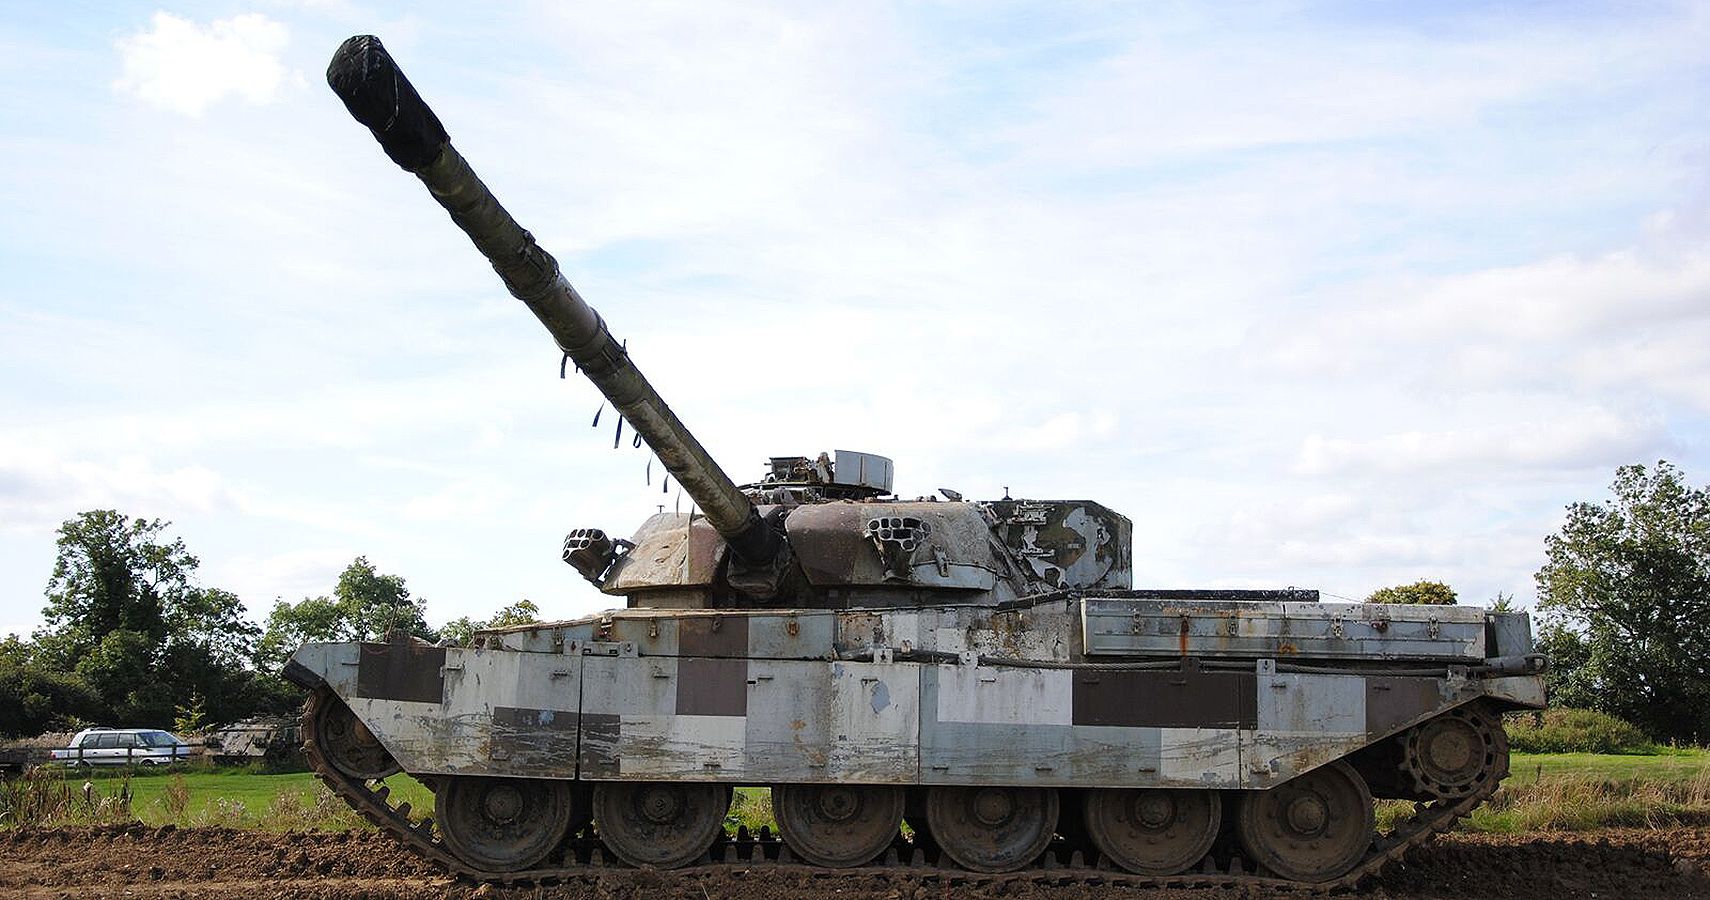 MK10 Chieftain Tank: For $13,000-65,000